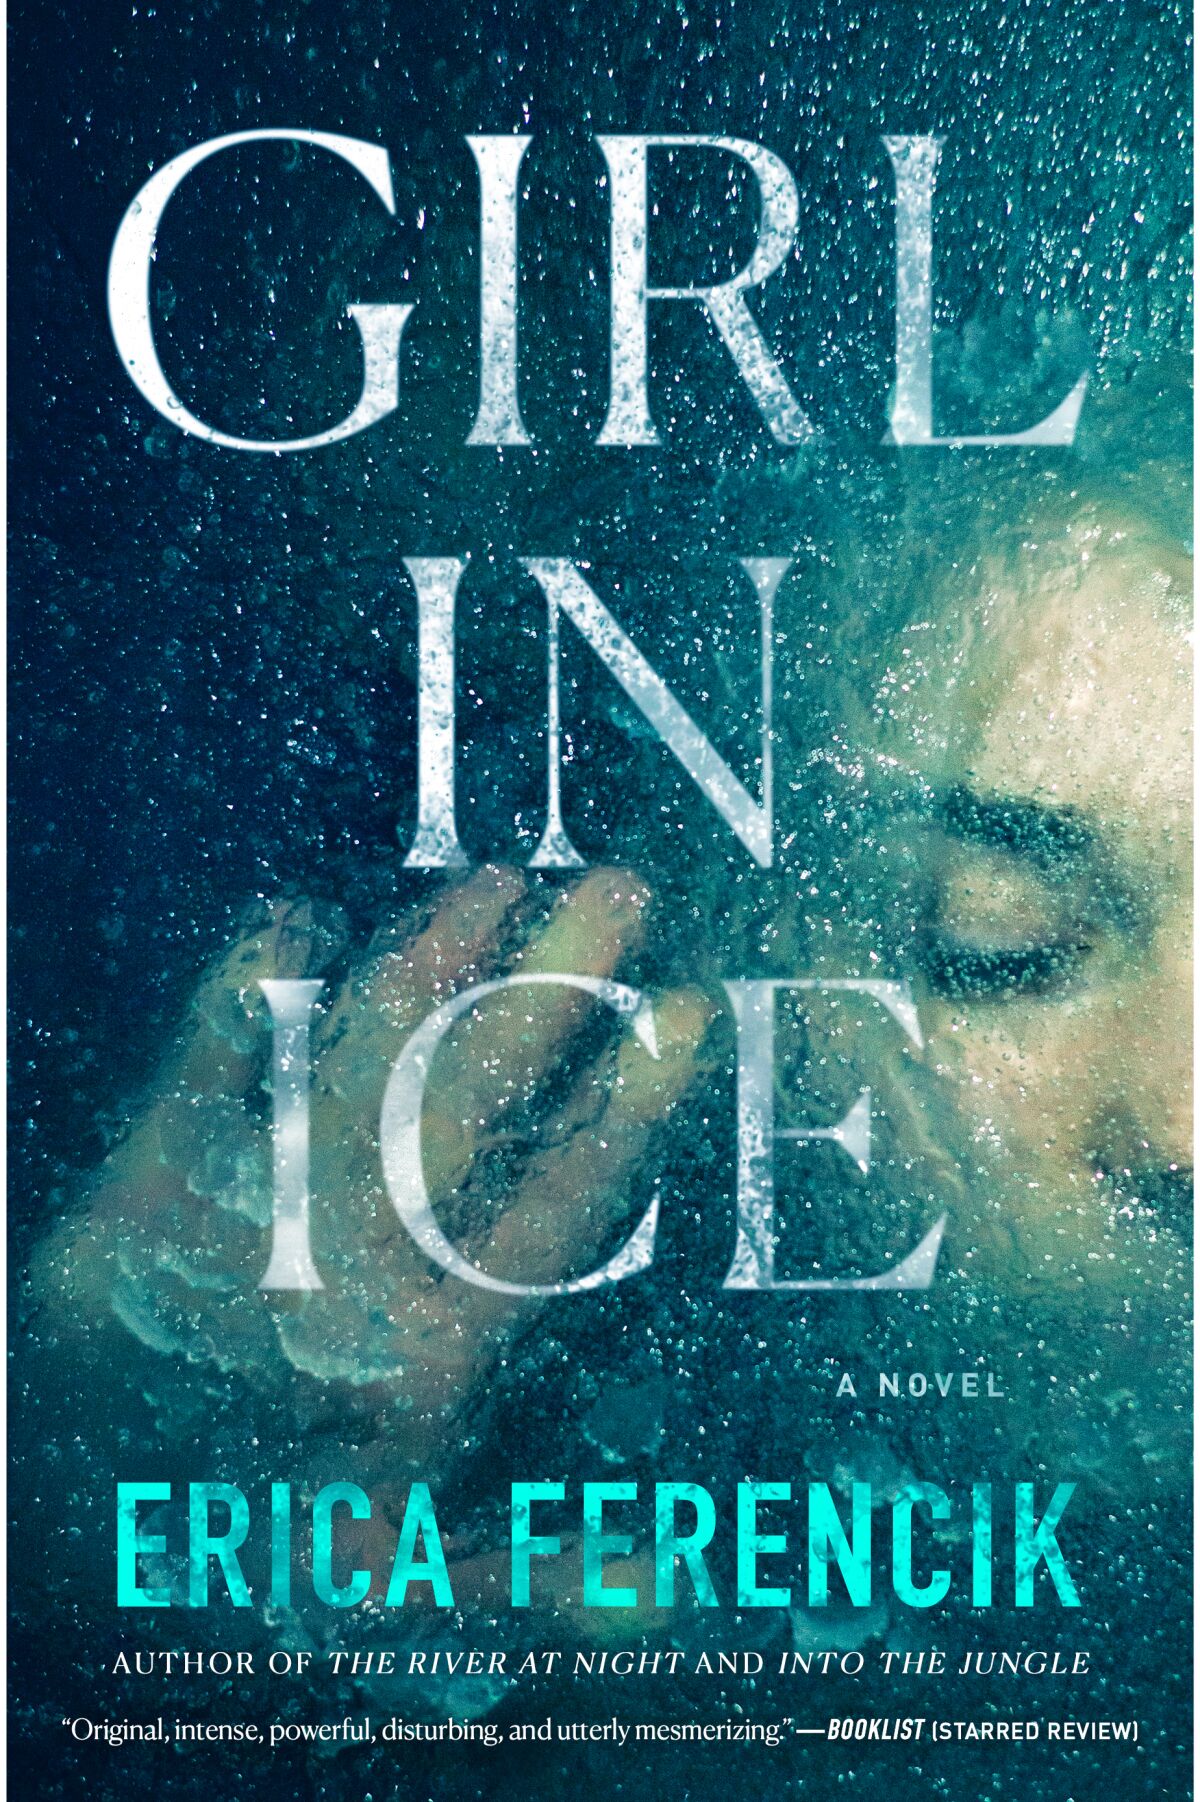 "Girl in Ice," by Erica Ferencik